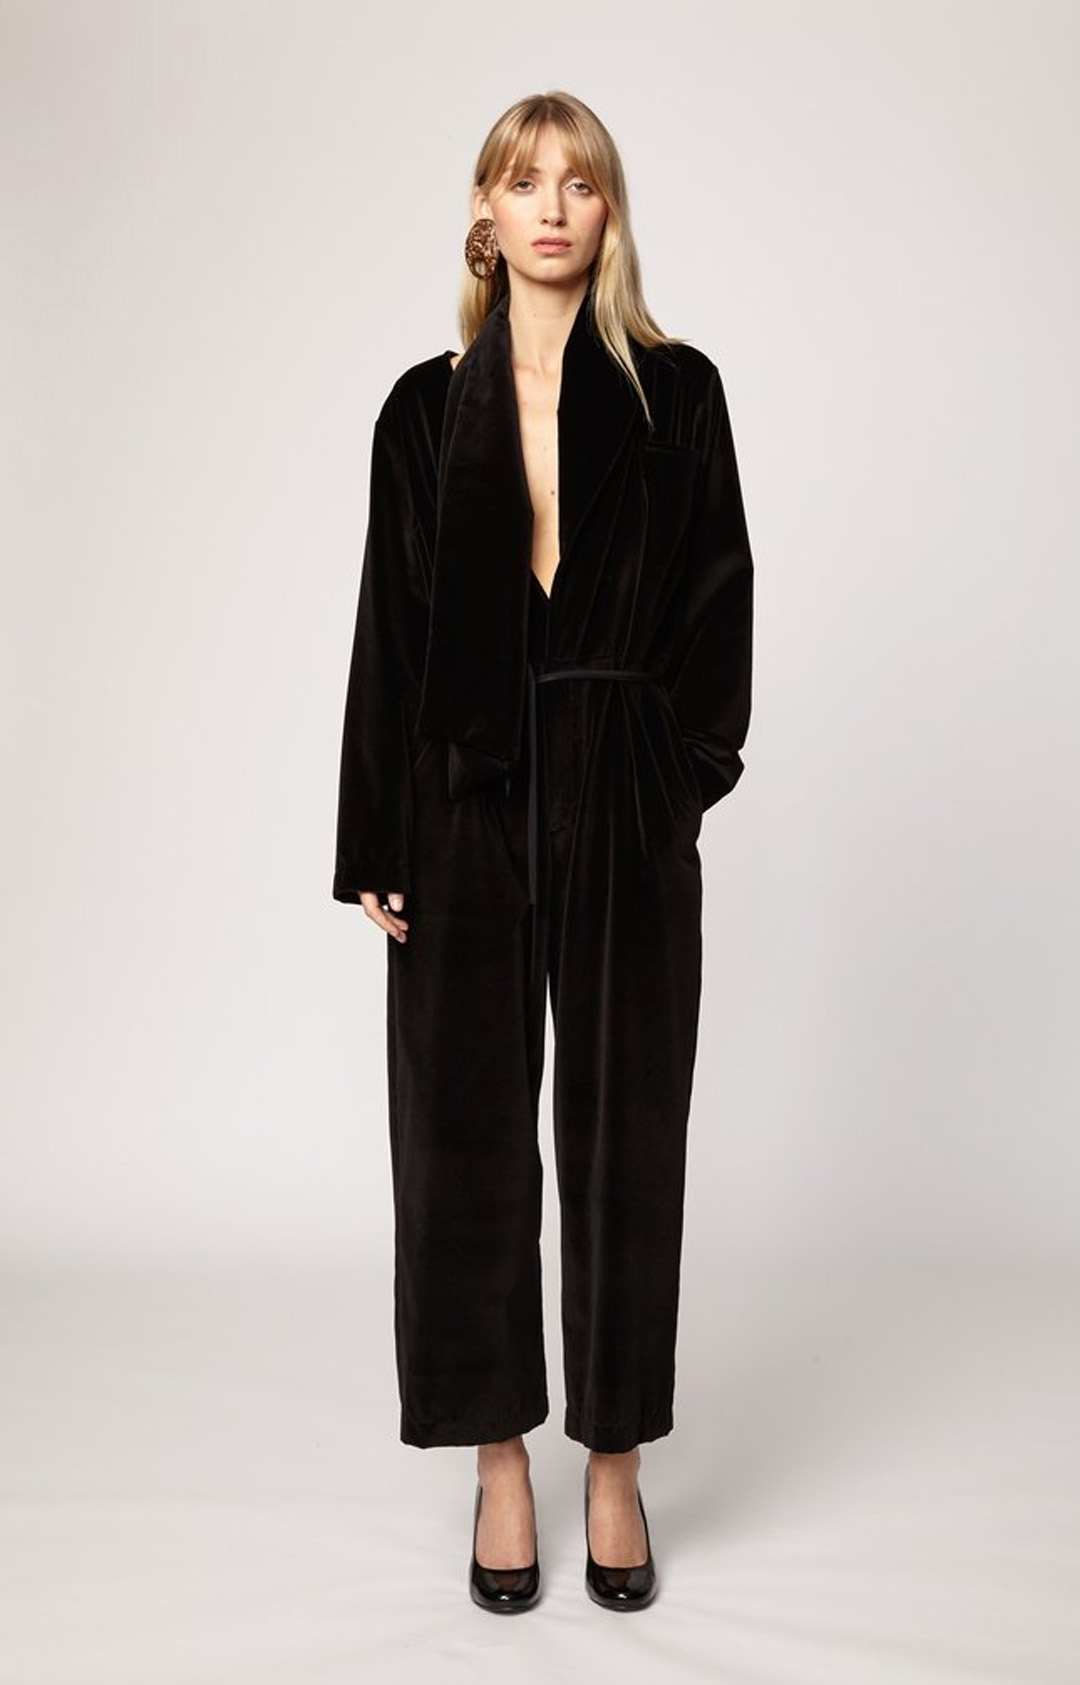 The Dawn Jumpsuit, $480 AUD from Arnsdorf